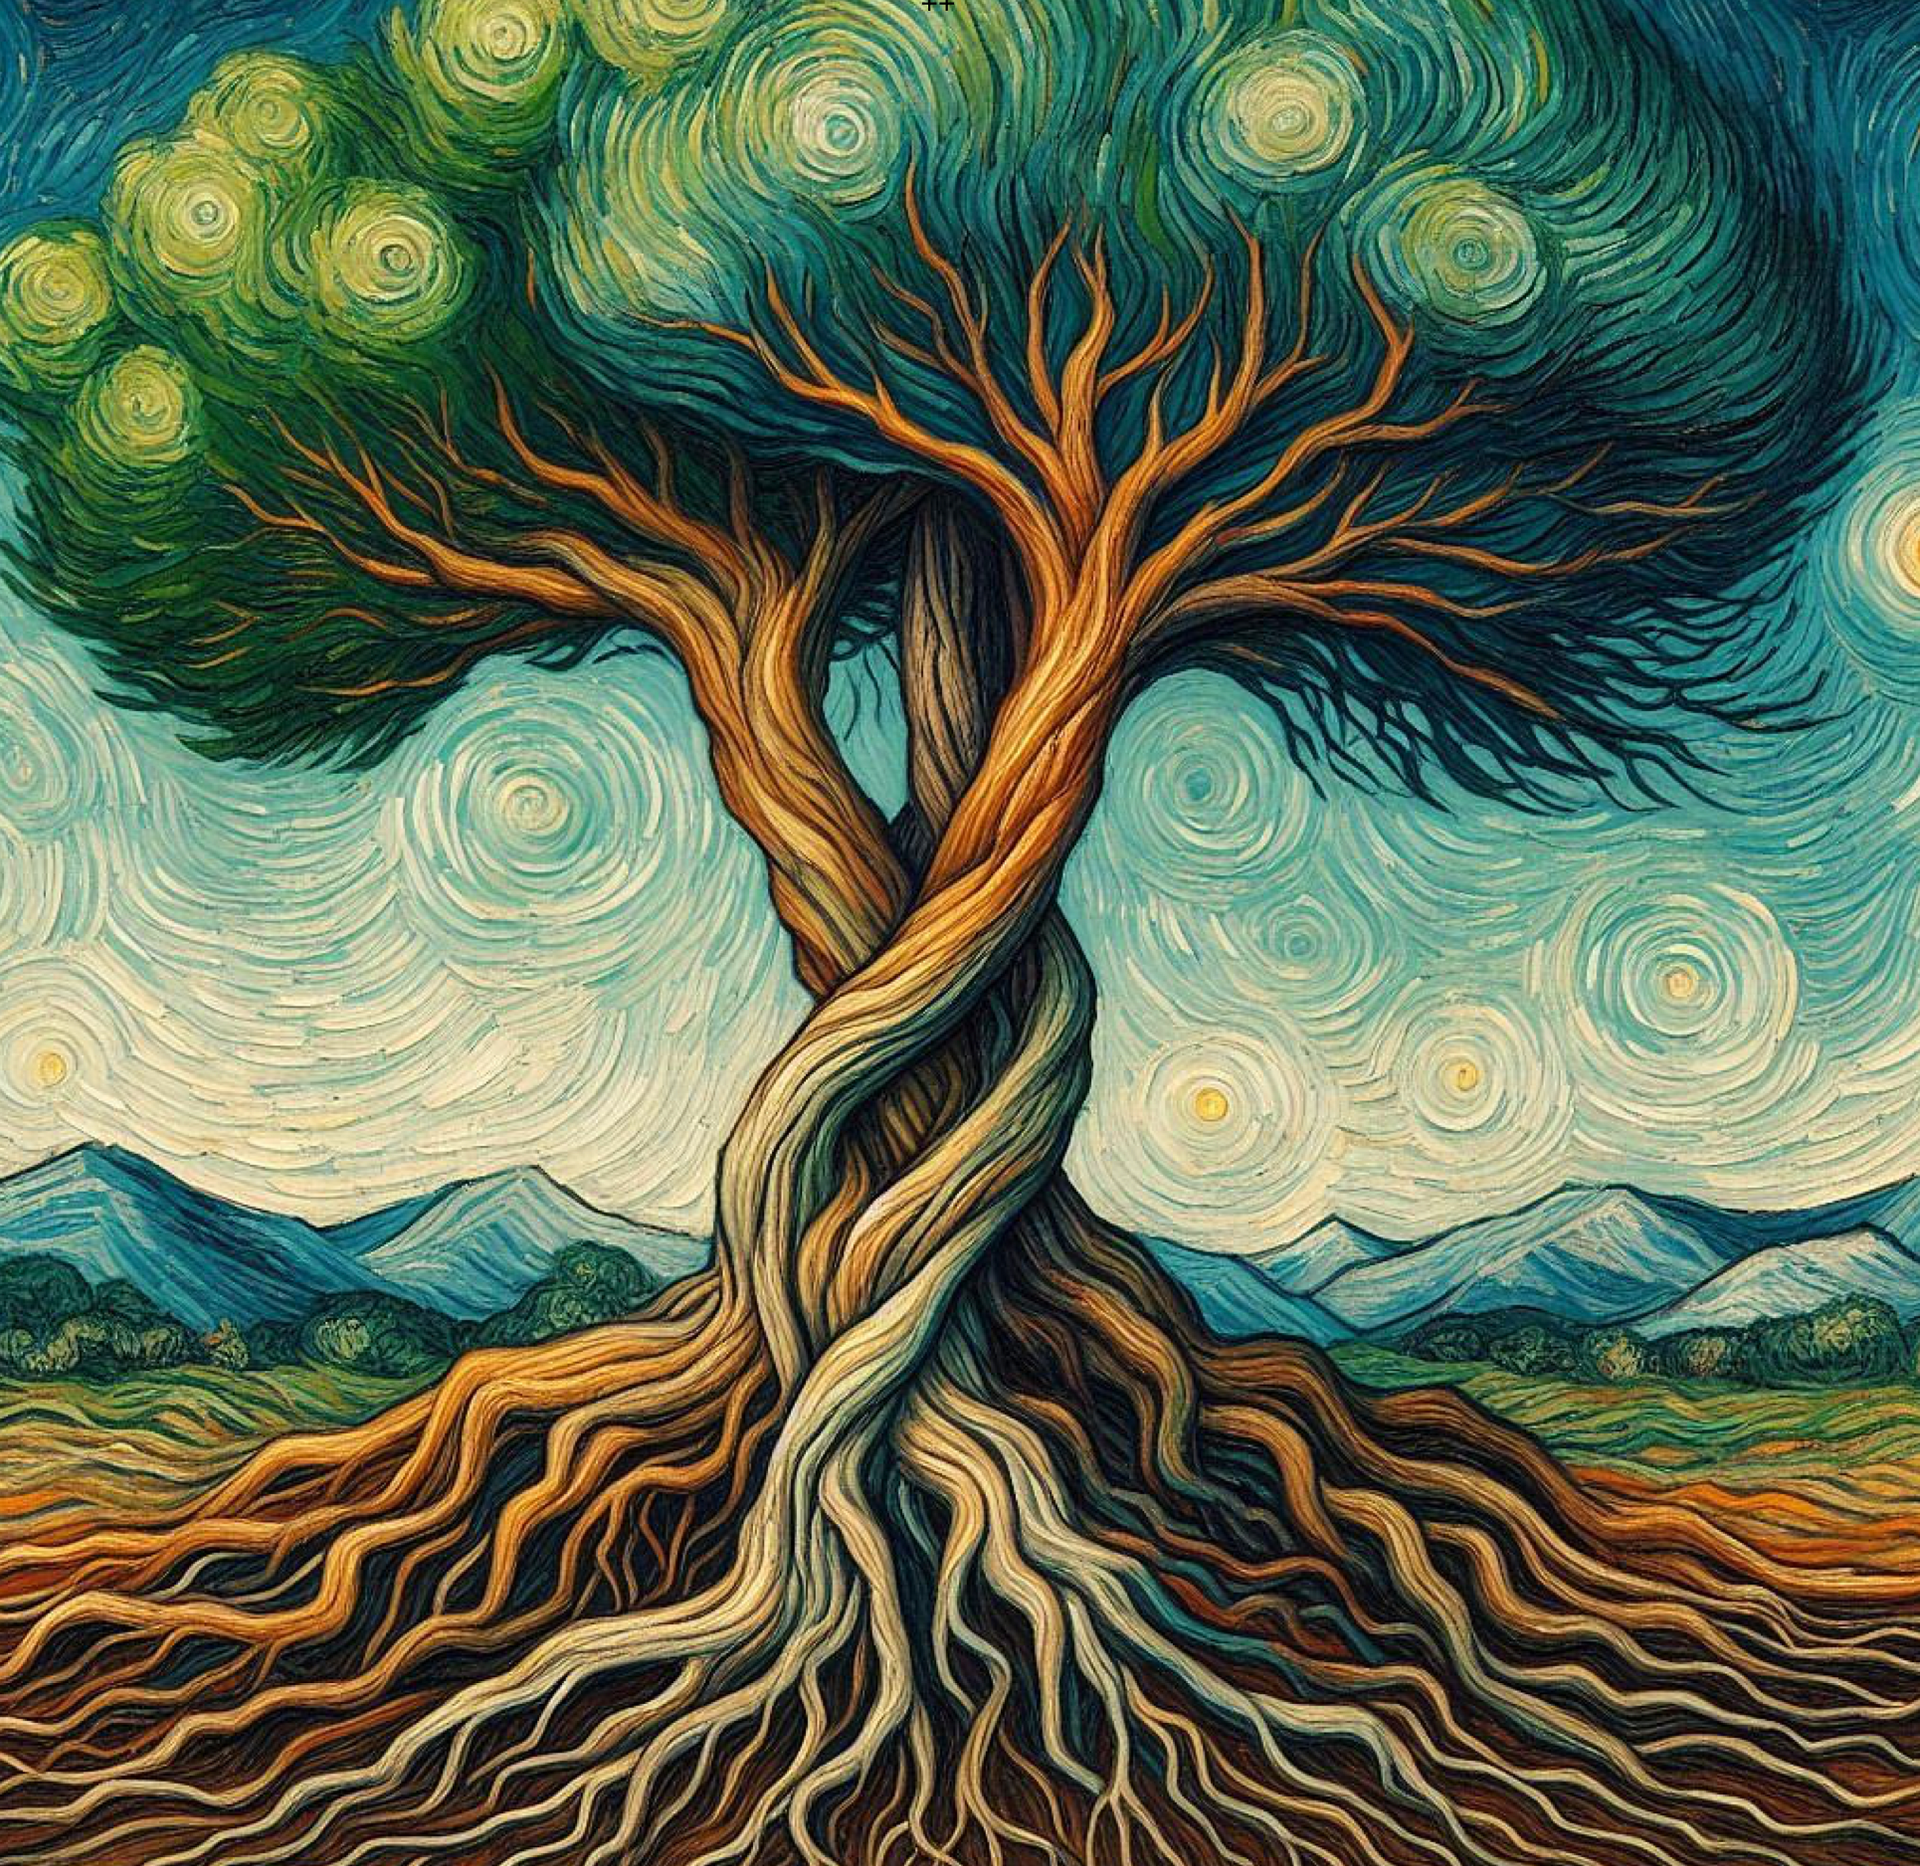 A Van-Gogh style pair of trees with its roots entangled and embracing each other. Produced by AI